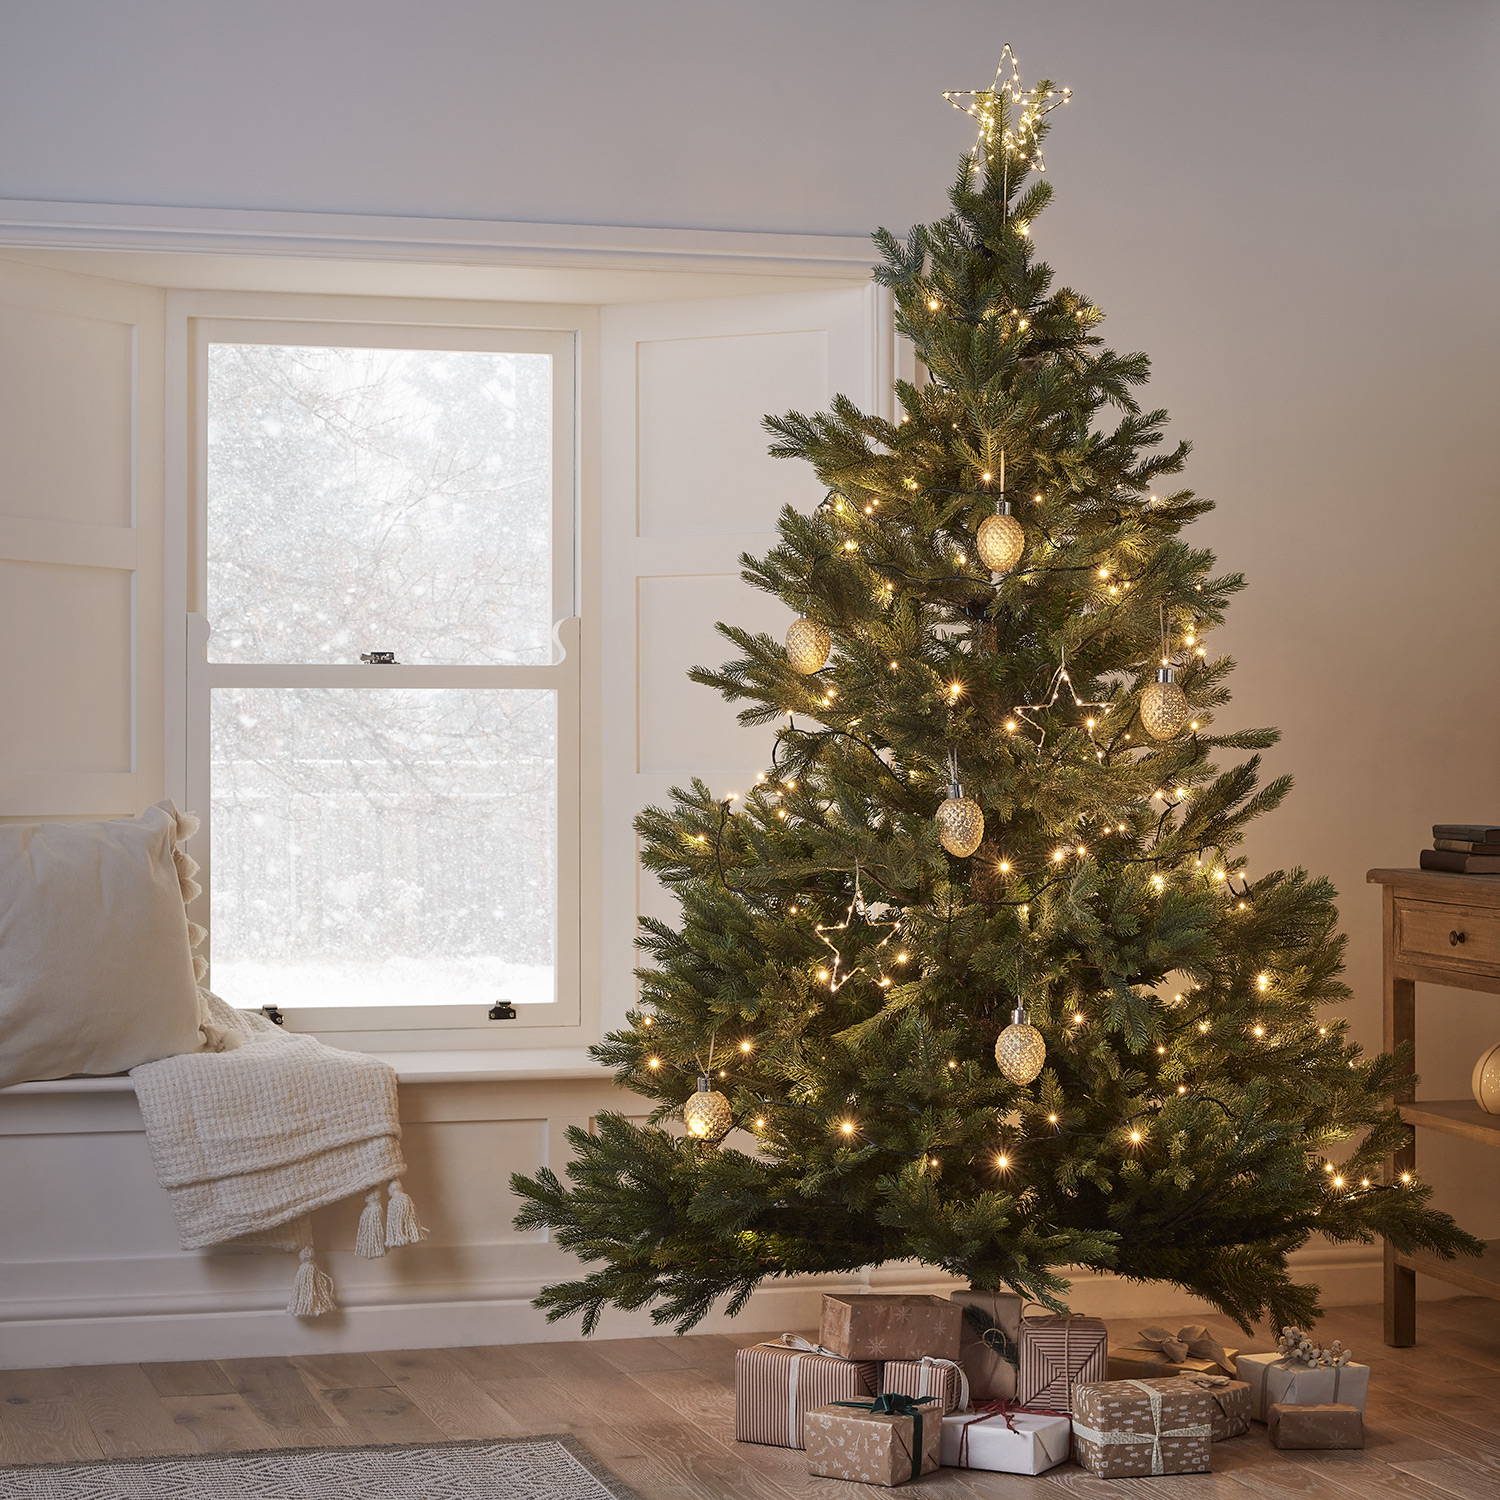 A cosy Christmas tree inside with gold warm white light up decorations.